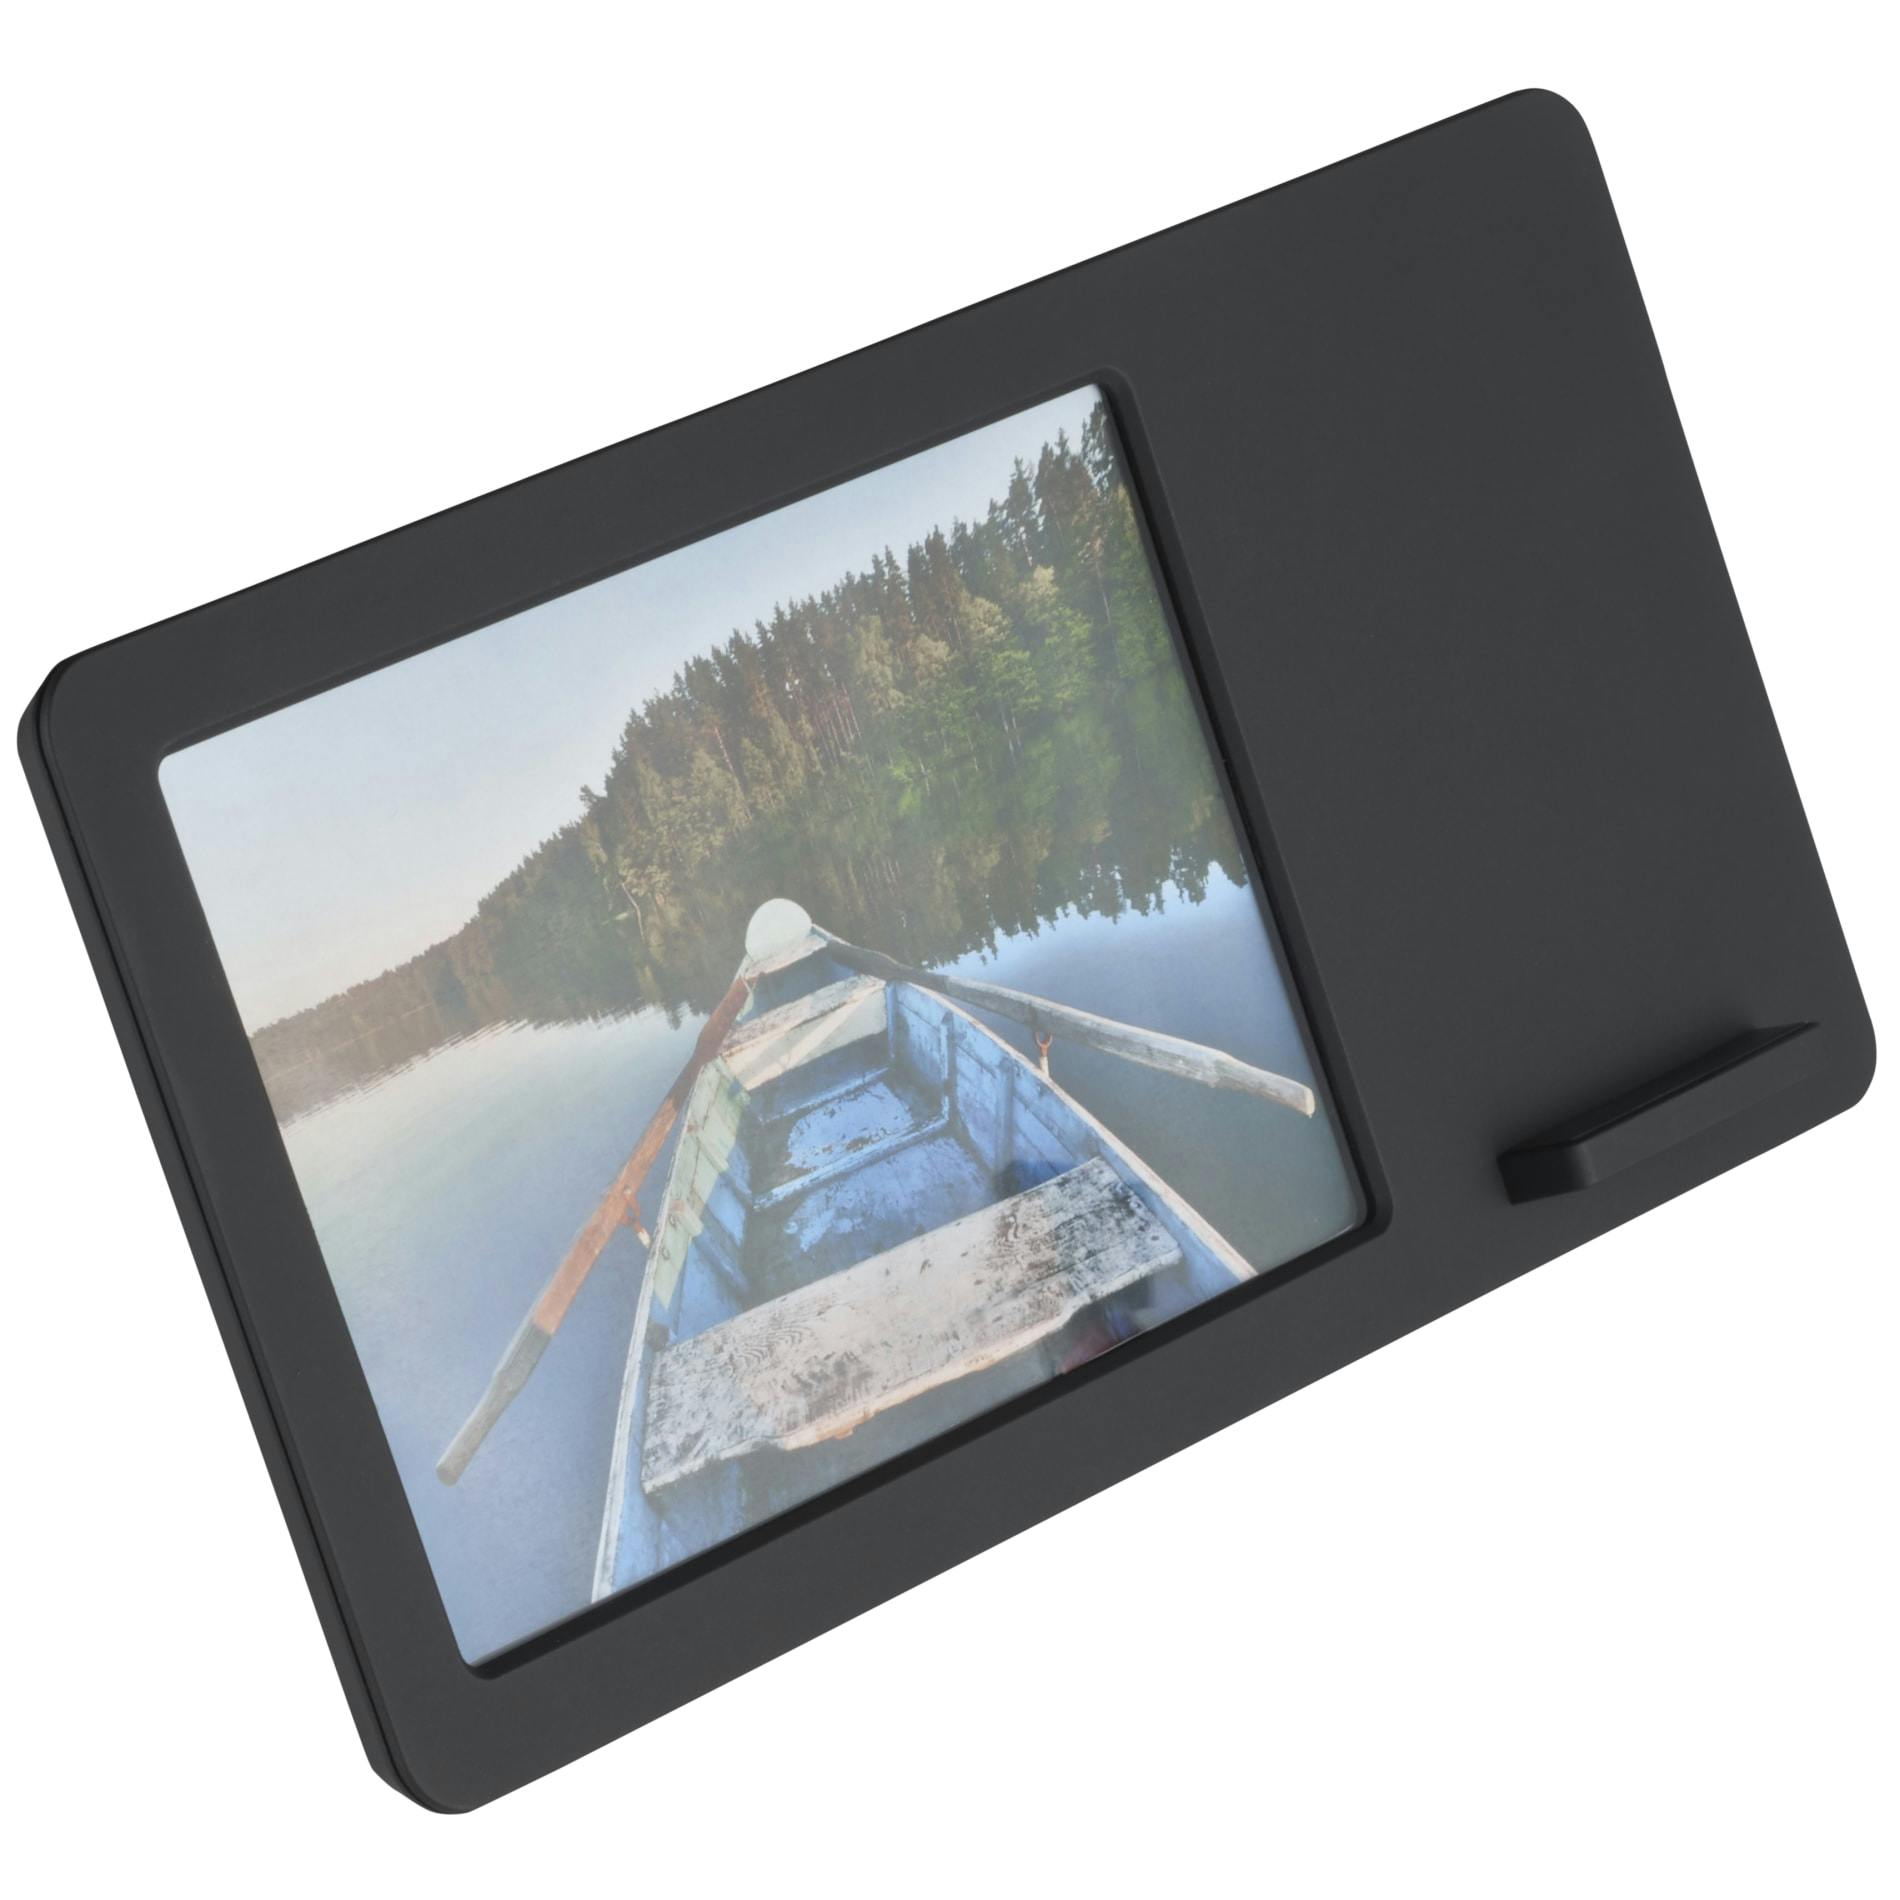 Glimpse Photo Frame with Wireless Charging Pad - additional Image 2